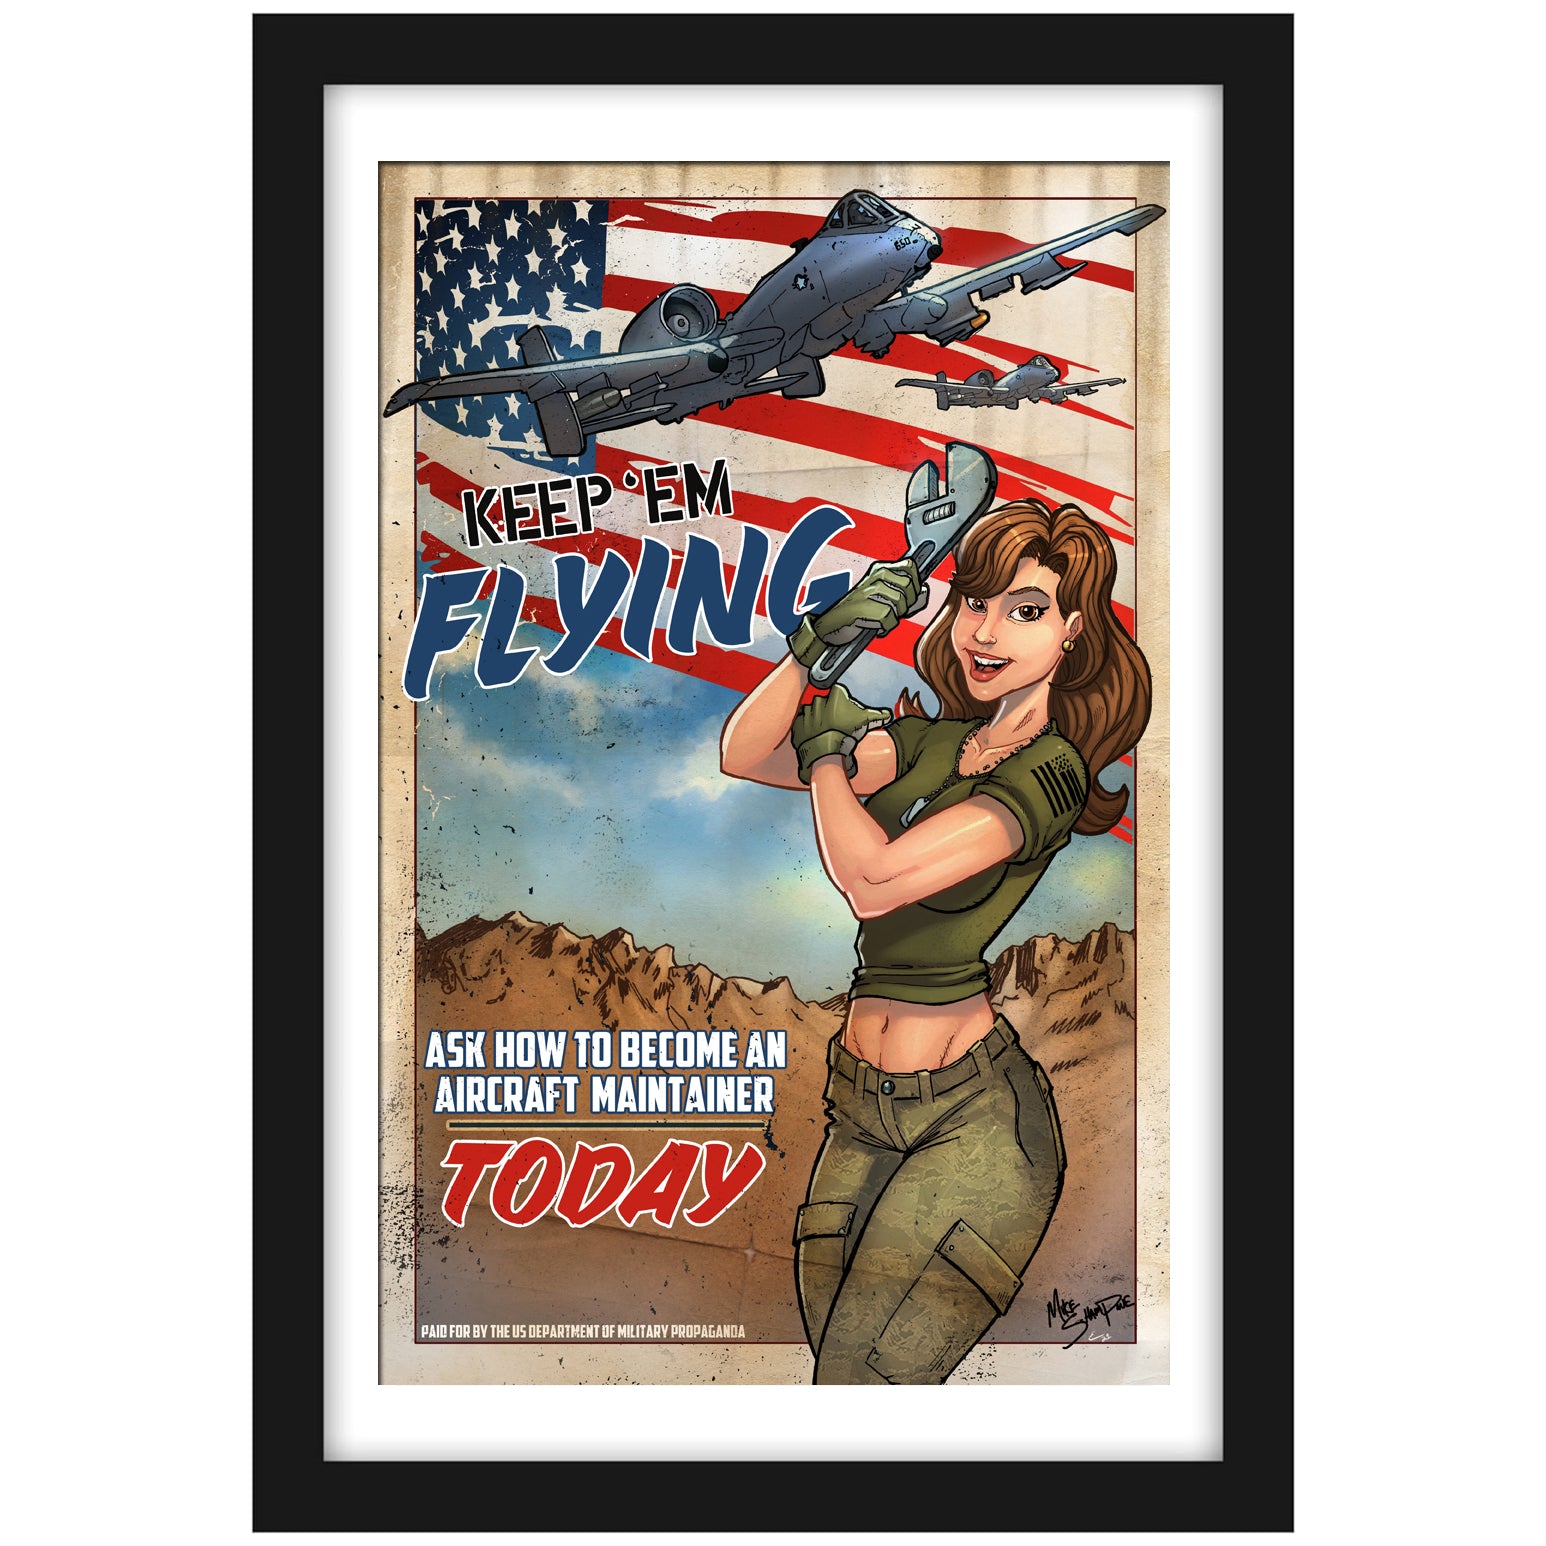 A-10 "Keep 'Em Flying" - Vintage Print Pinup & Airplane Art by Mike Shampine - Signed and Numbered